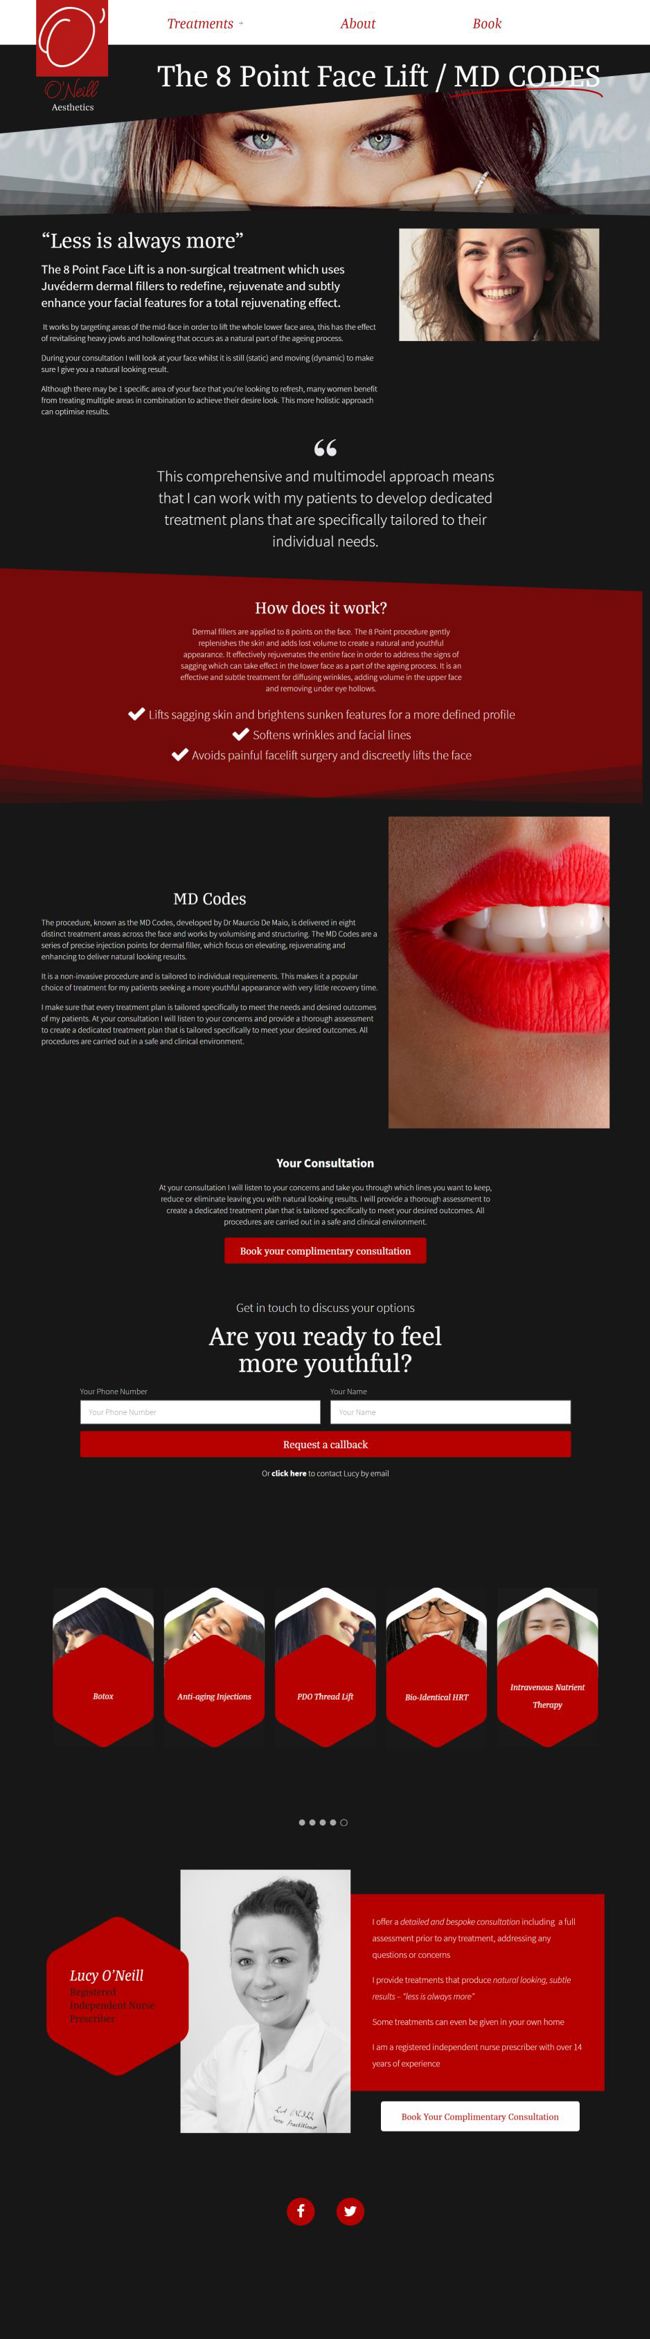 O'Neill Aesthetics Wordpress Web Design SP009 8 Point Facelift The Md Codes